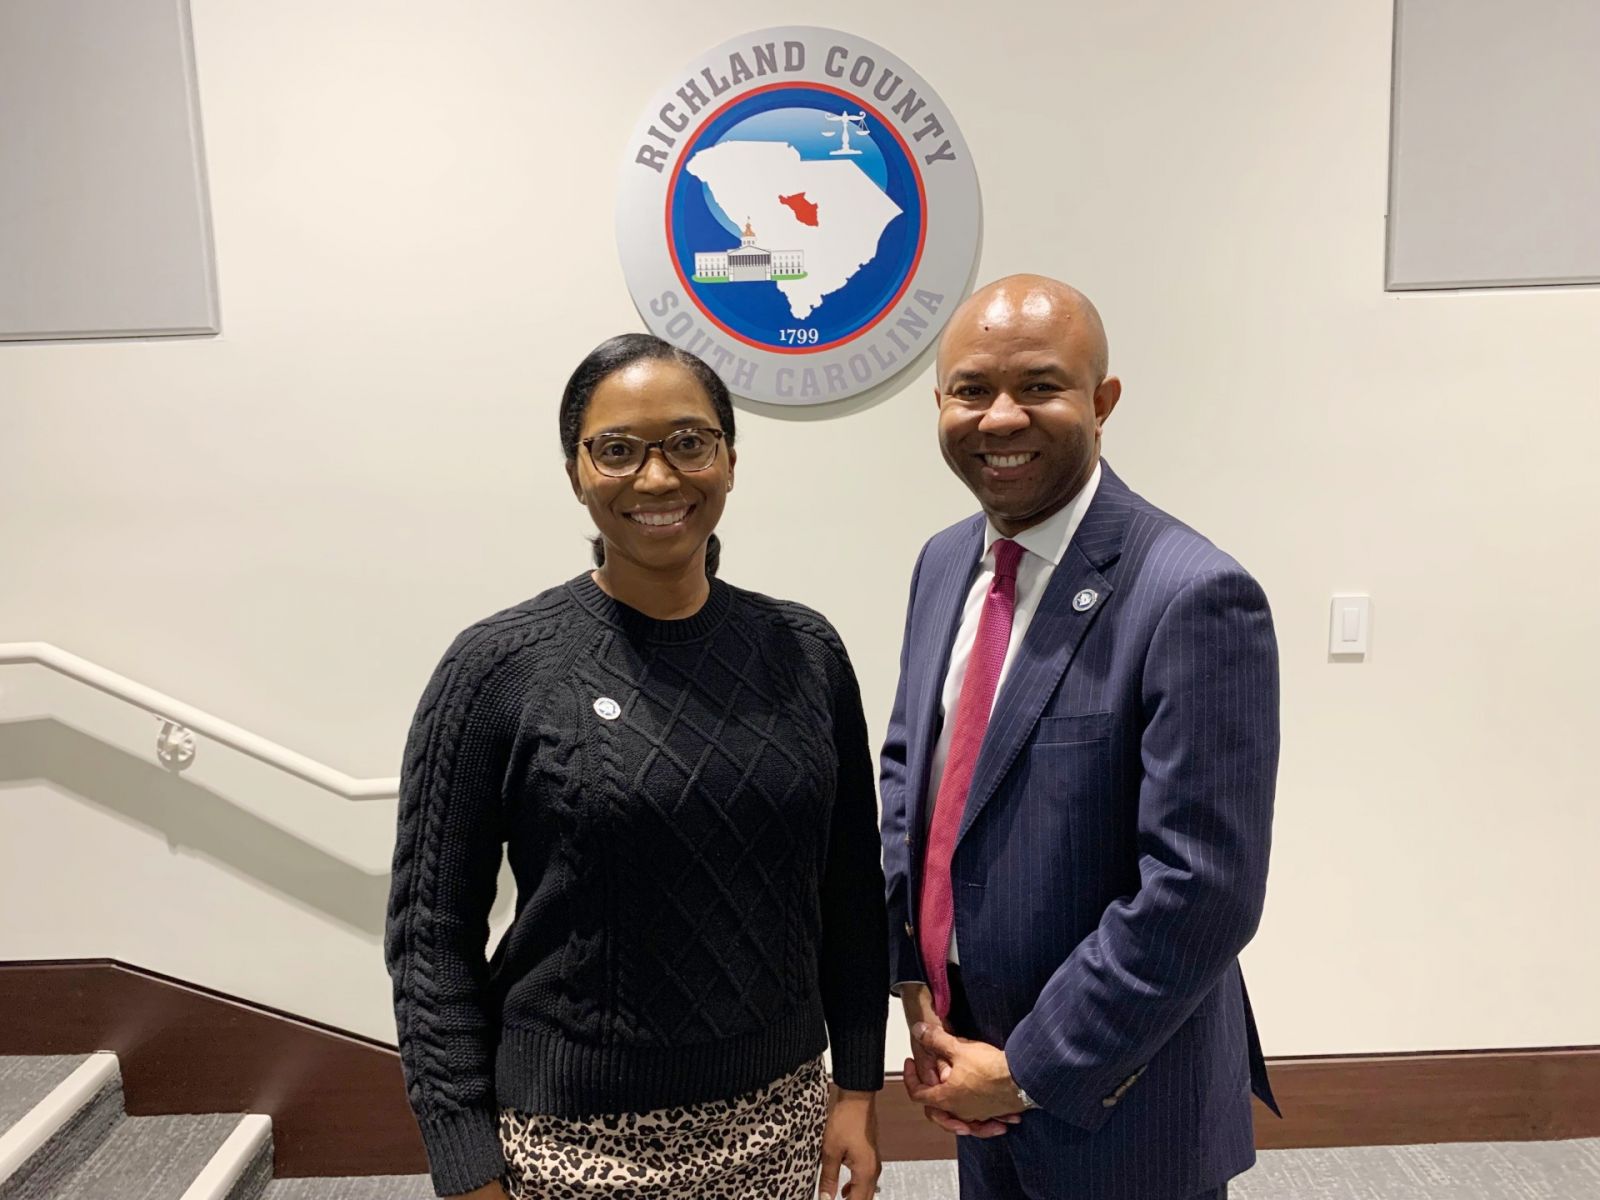 Jesica Makey (left) is Richland County Council's new vice chair, while Overture Walker (right) is the new council chair. (Photo/Provided) 